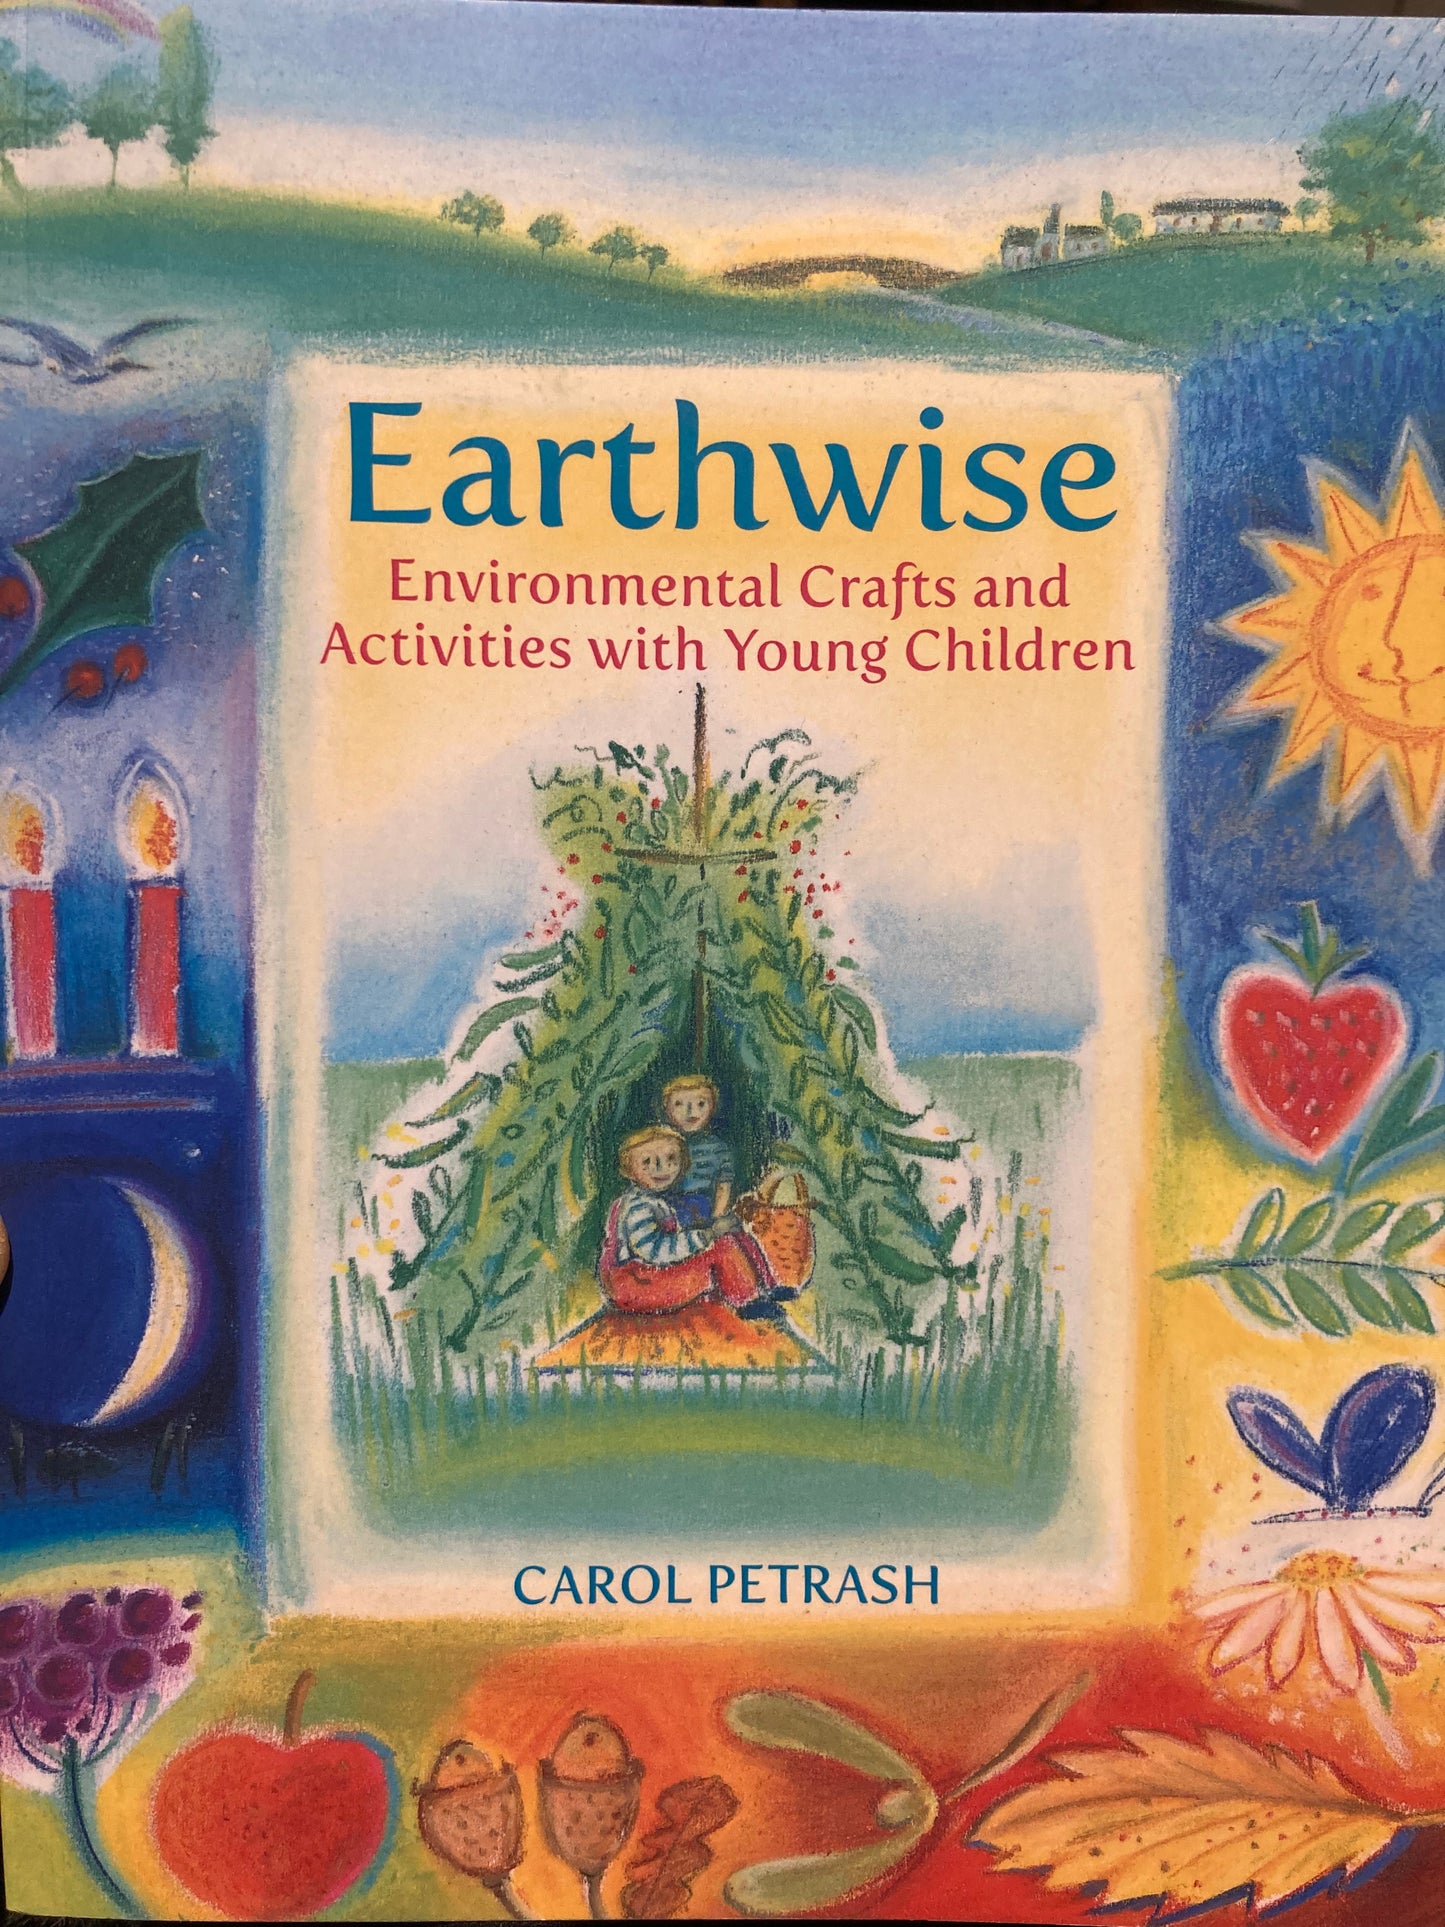 Crafting Resource Book - EARTHWISE, Environmental Crafts